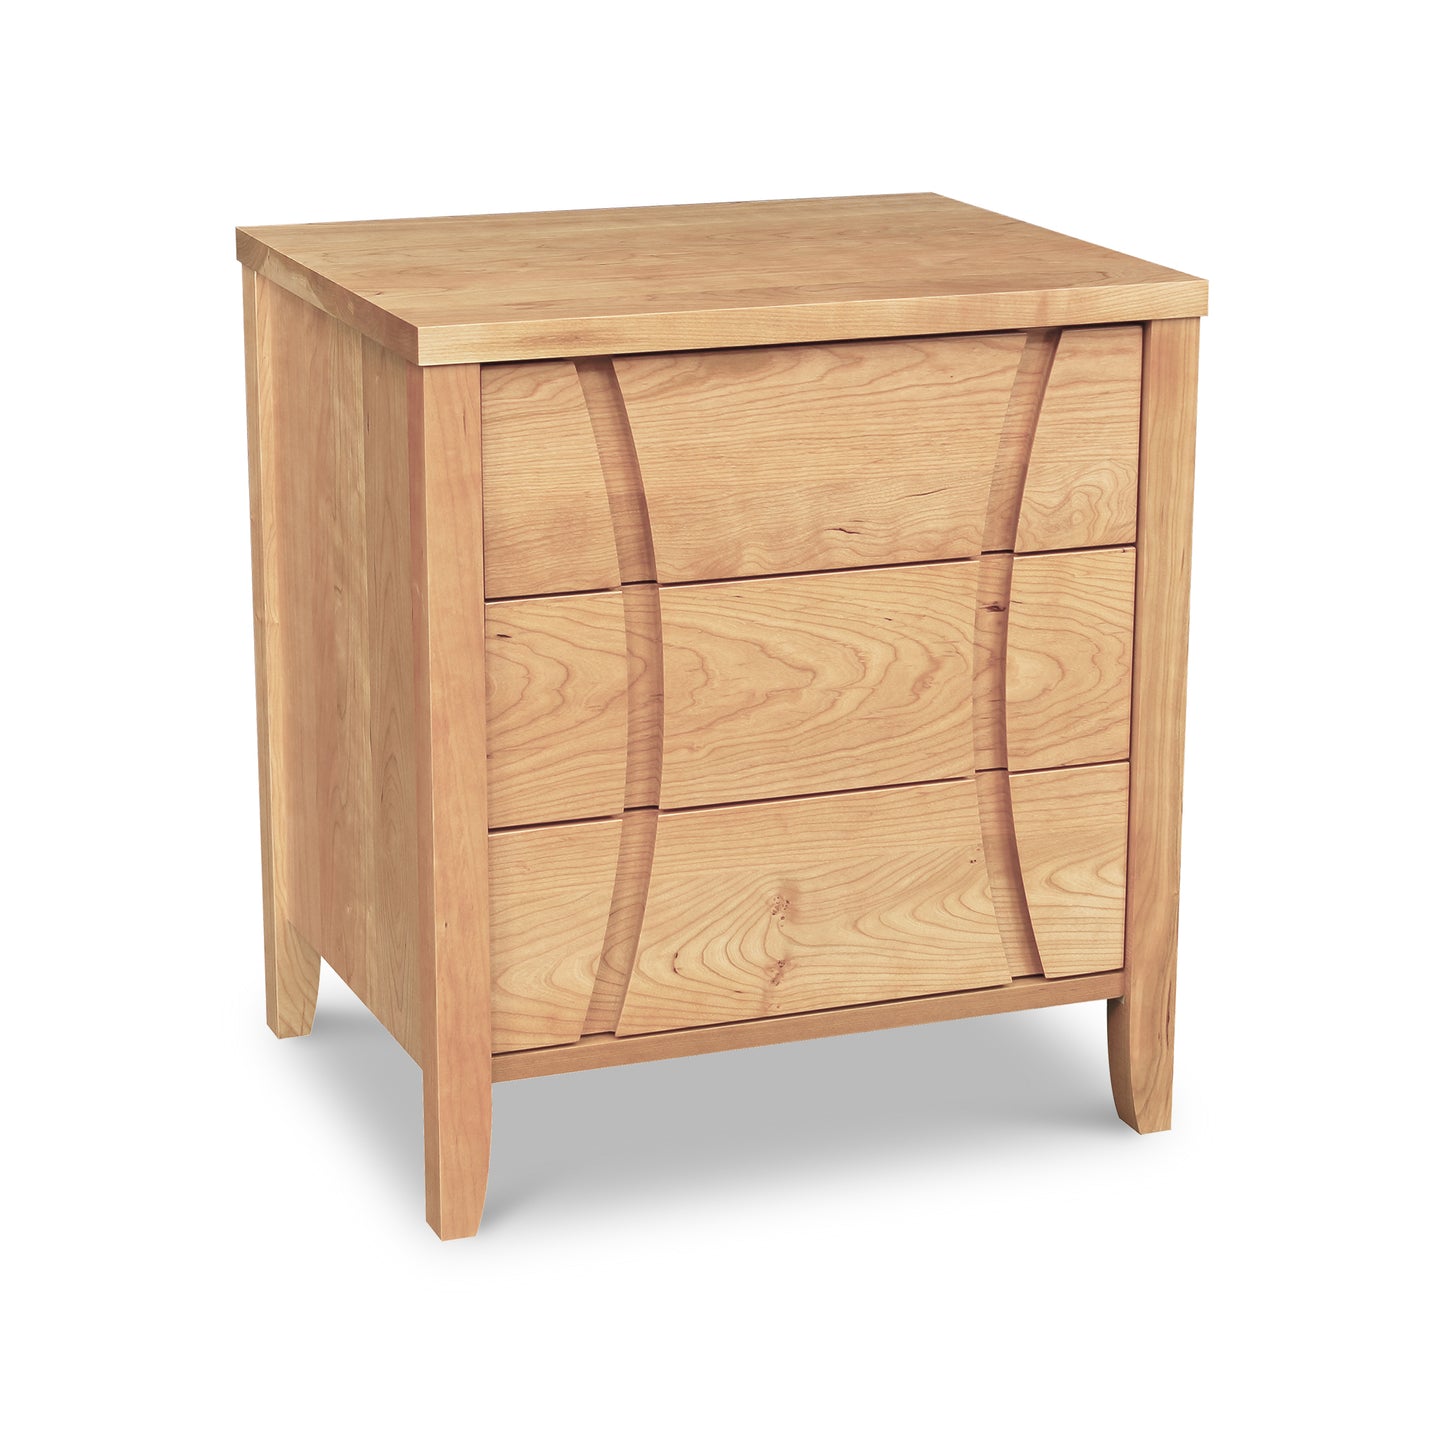 A Lyndon Furniture hardwood Holland 3-Drawer Nightstand for the bedroom.